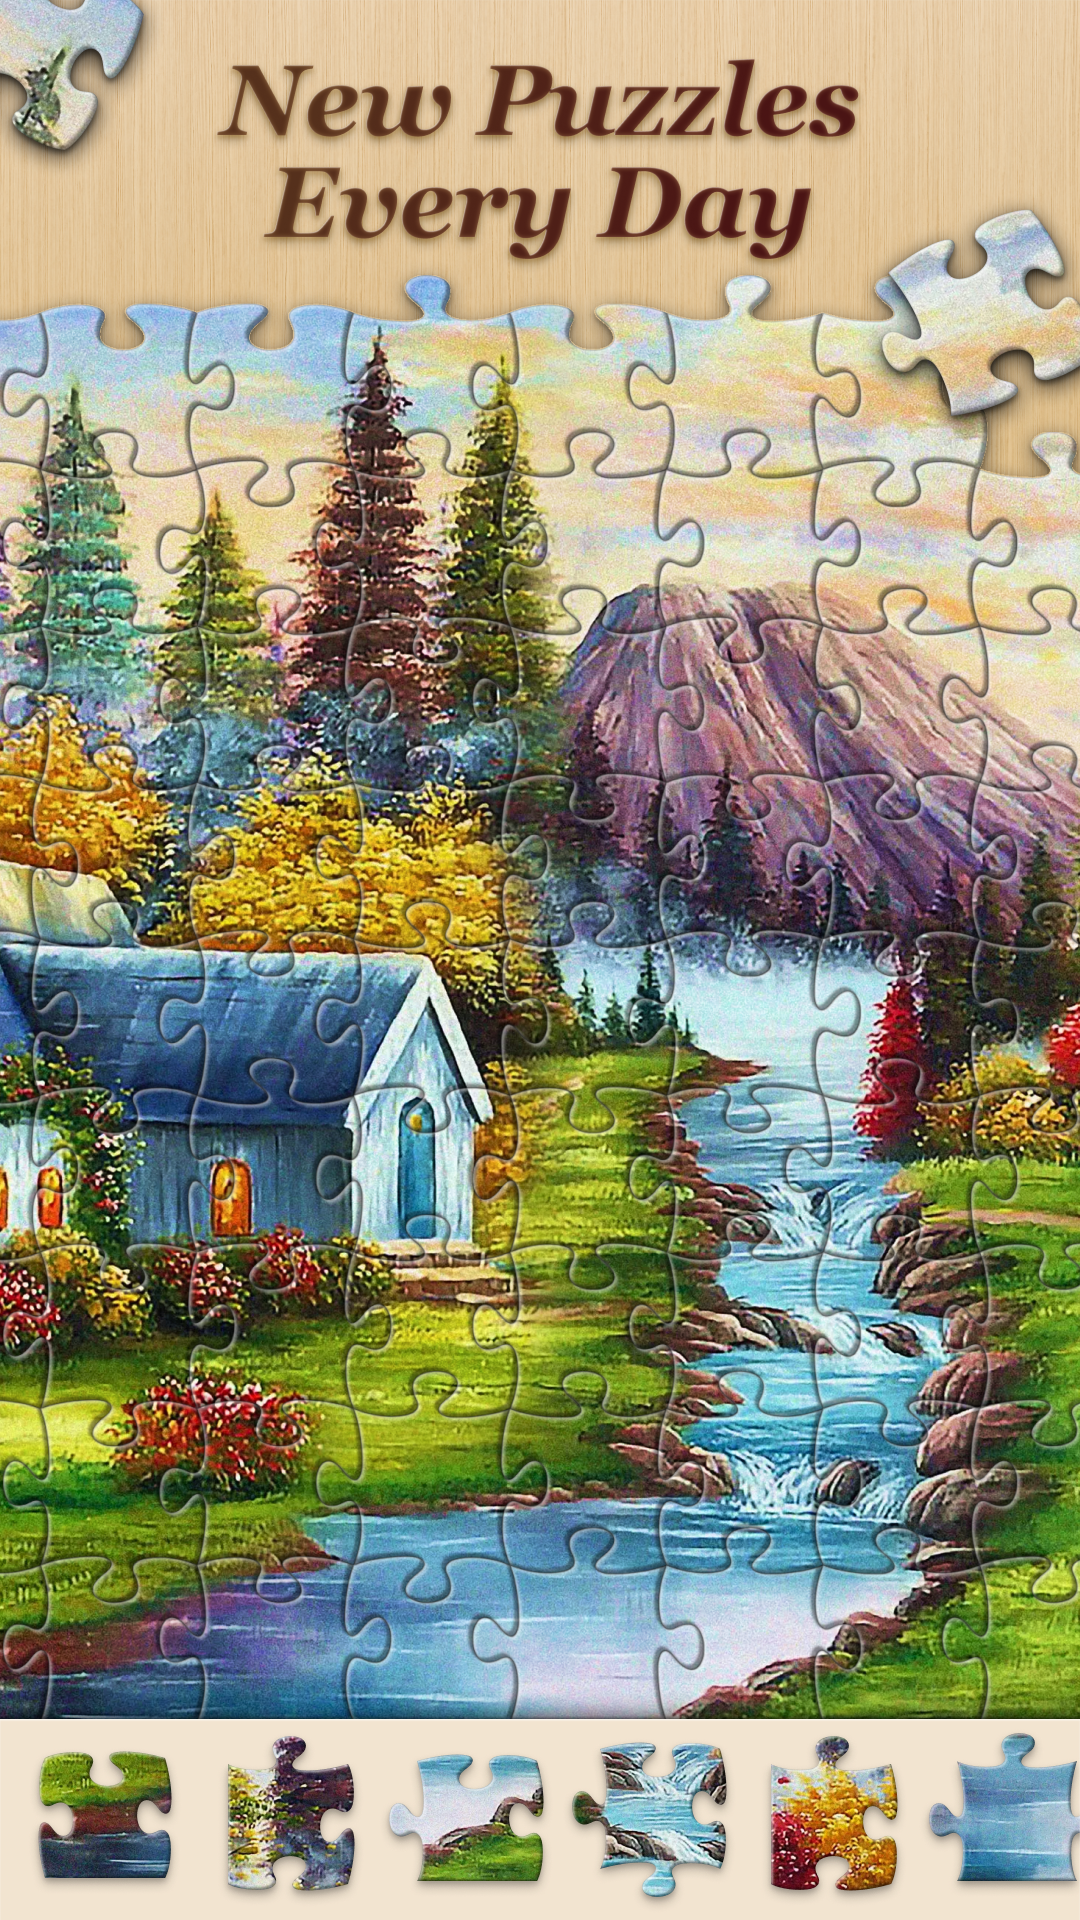 Jigsawscapes® - Jigsaw Puzzles